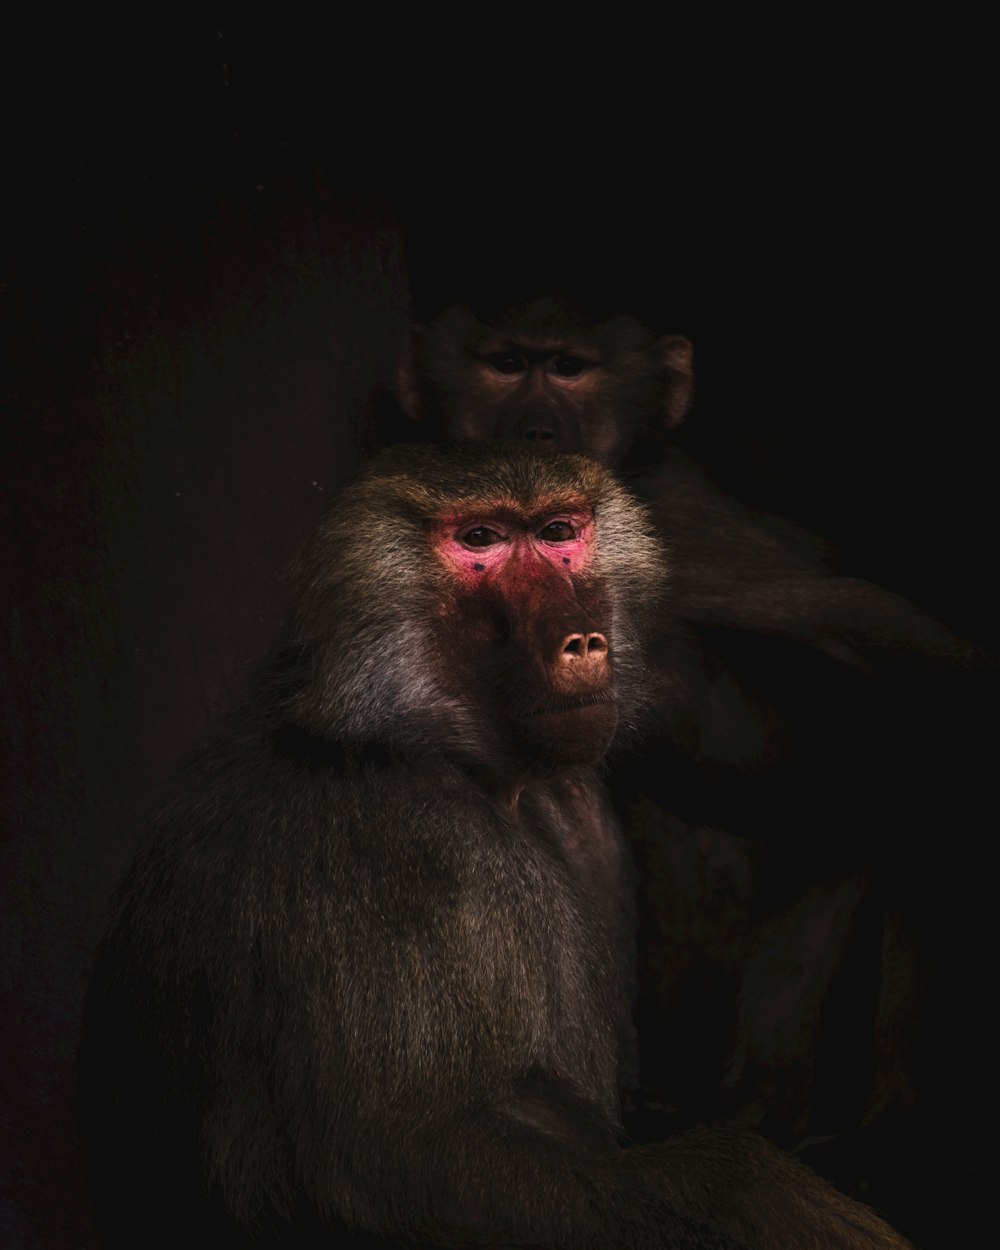 black monkey in close up photography